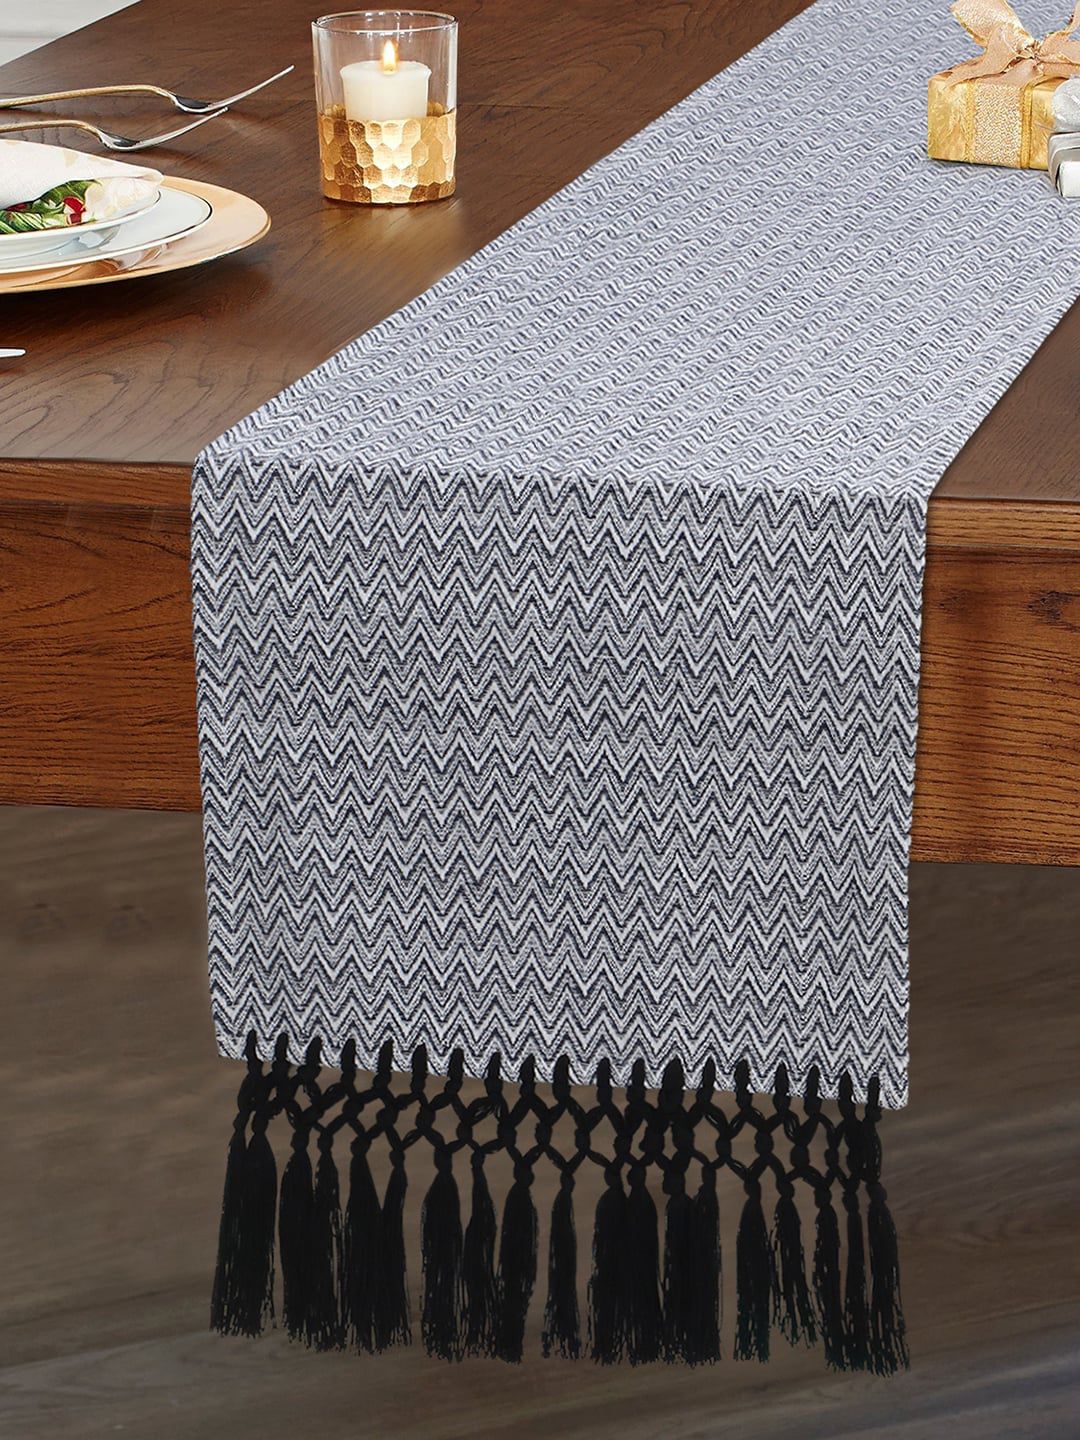 Mezposh White & Black Embroidered 6-Seater Table Runner With Tassels Price in India